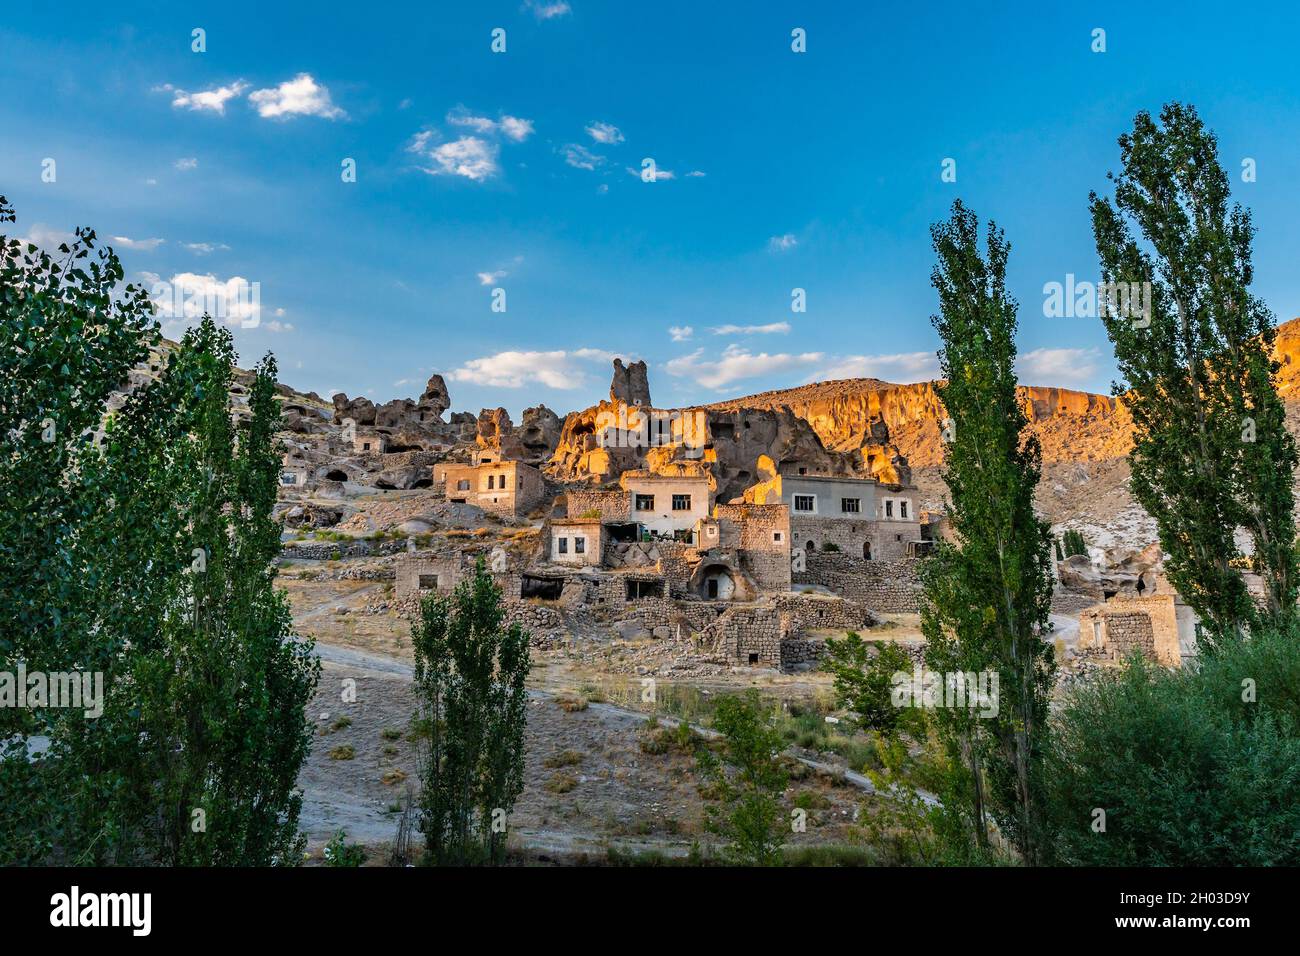 Soganli Valley Breathtaking Picturesque View of Village Houses during Sunset on a Blue Sky Day in Summer Stock Photo